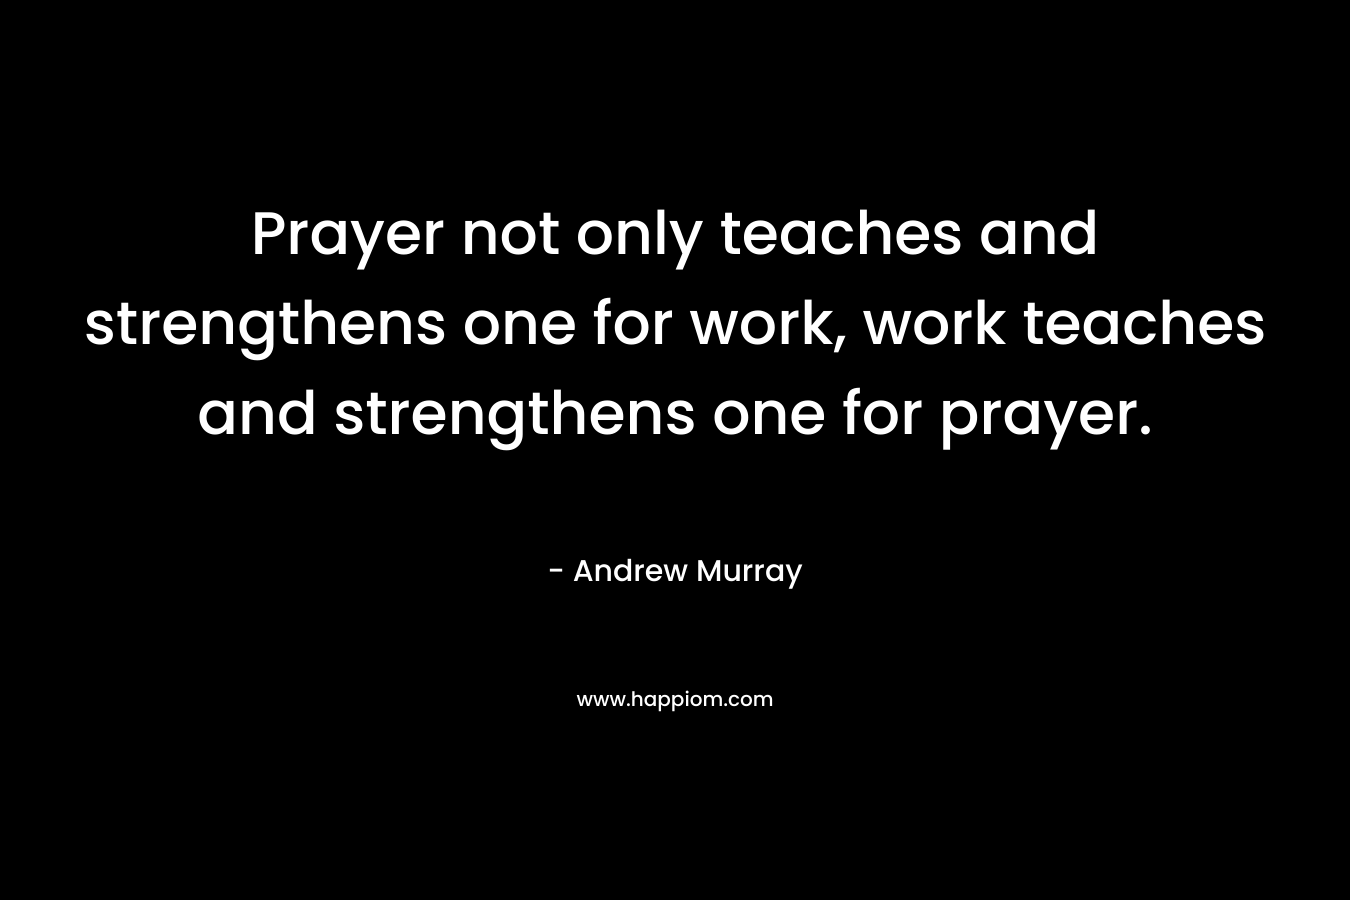 Prayer not only teaches and strengthens one for work, work teaches and strengthens one for prayer.